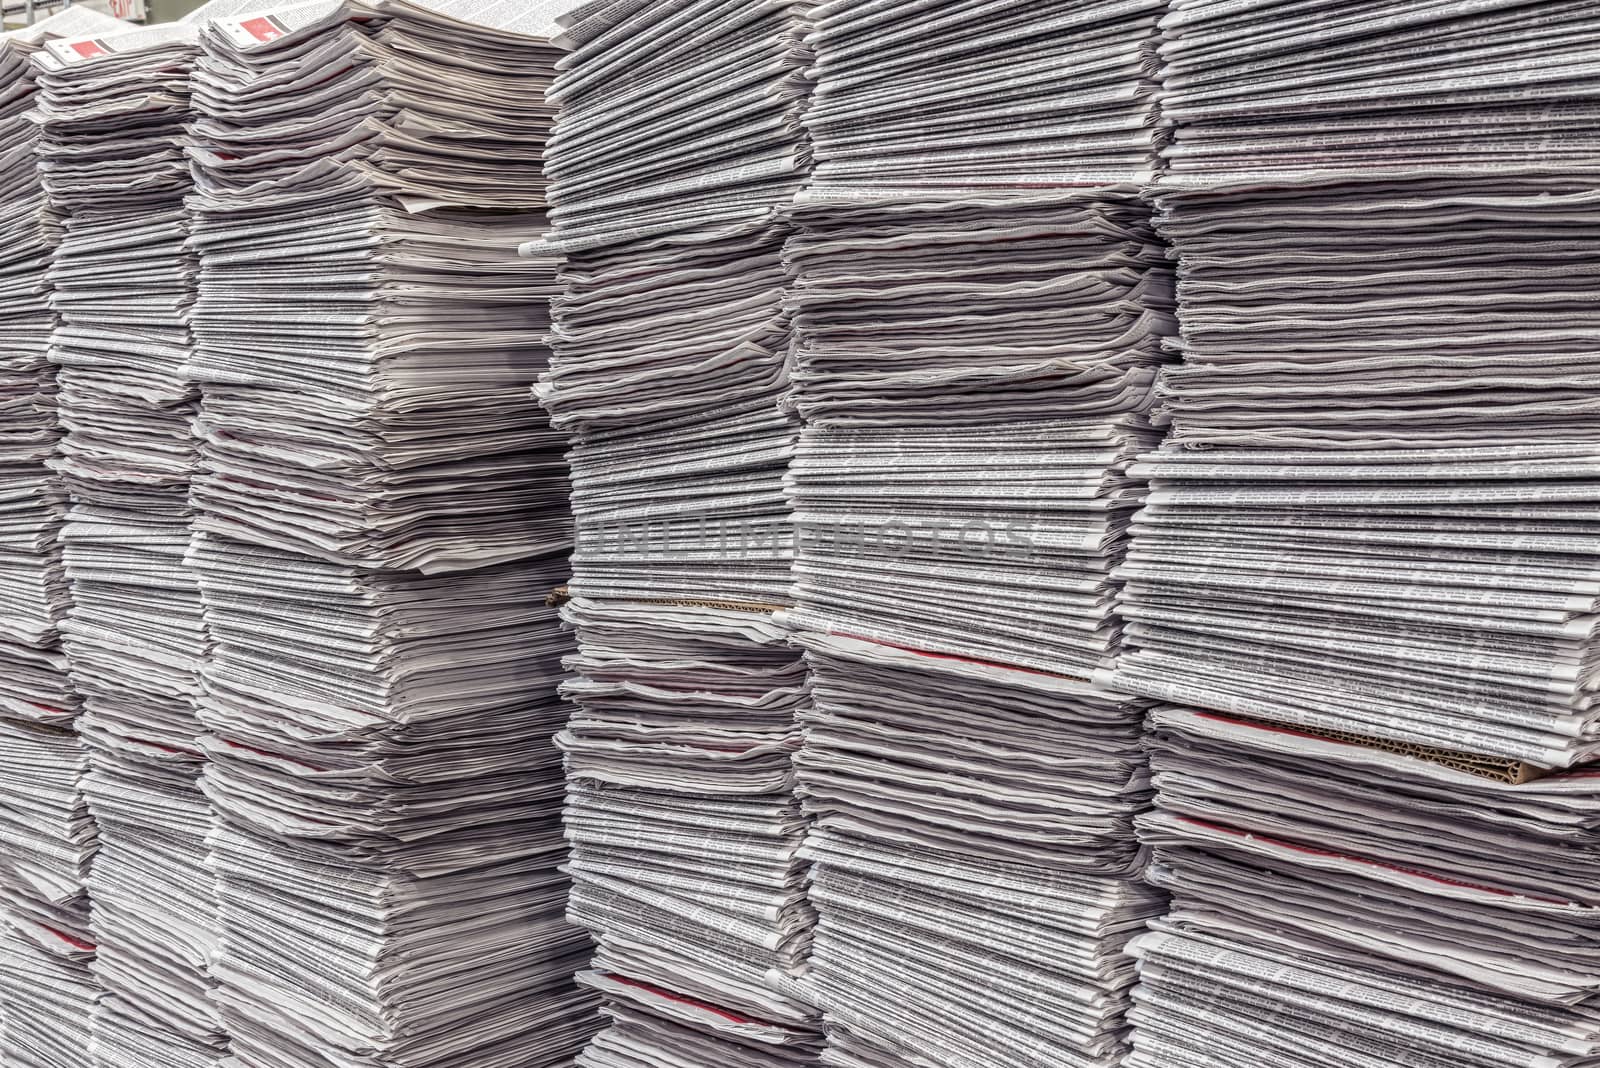 Close up shot of multiple newspaper stacks in a warehouse getting ready to be delivered